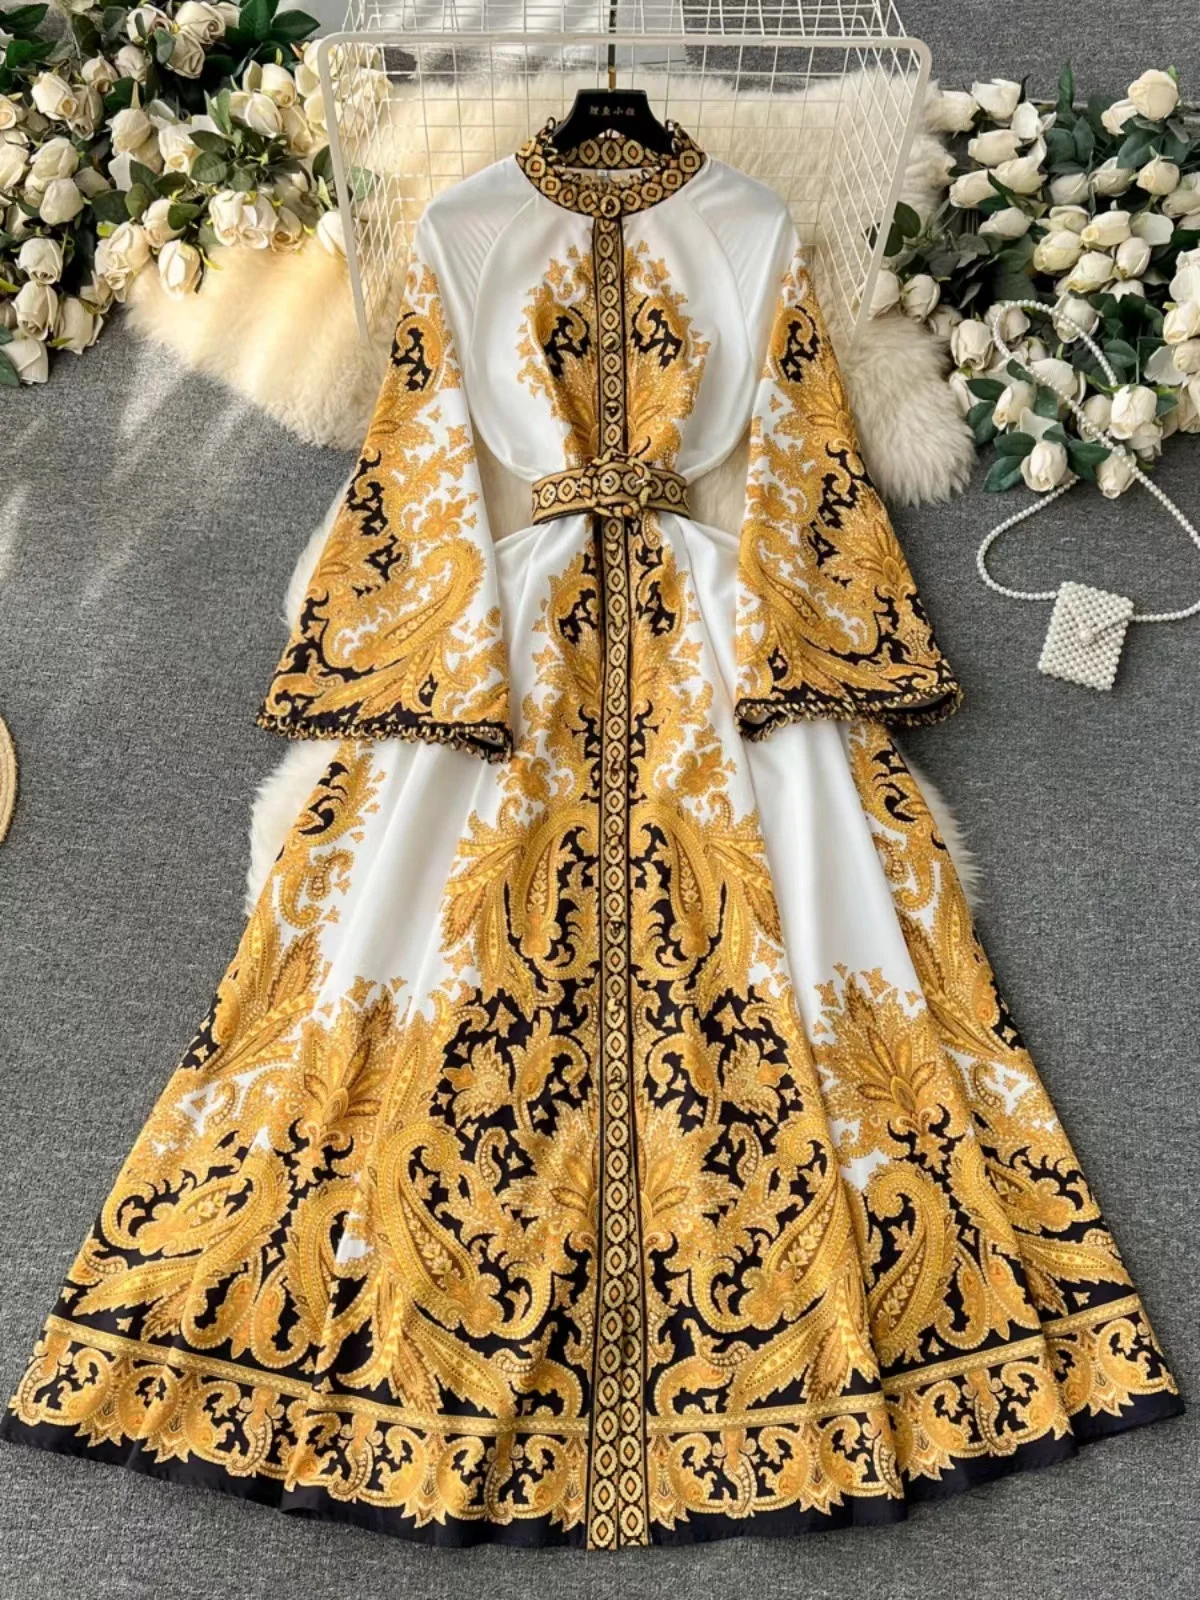 

French Vintage Palace Style A-Line Skirt Desgin Print Slim Fit Long Flace Sleeves Temperament Chiffon Dress For Spring Women